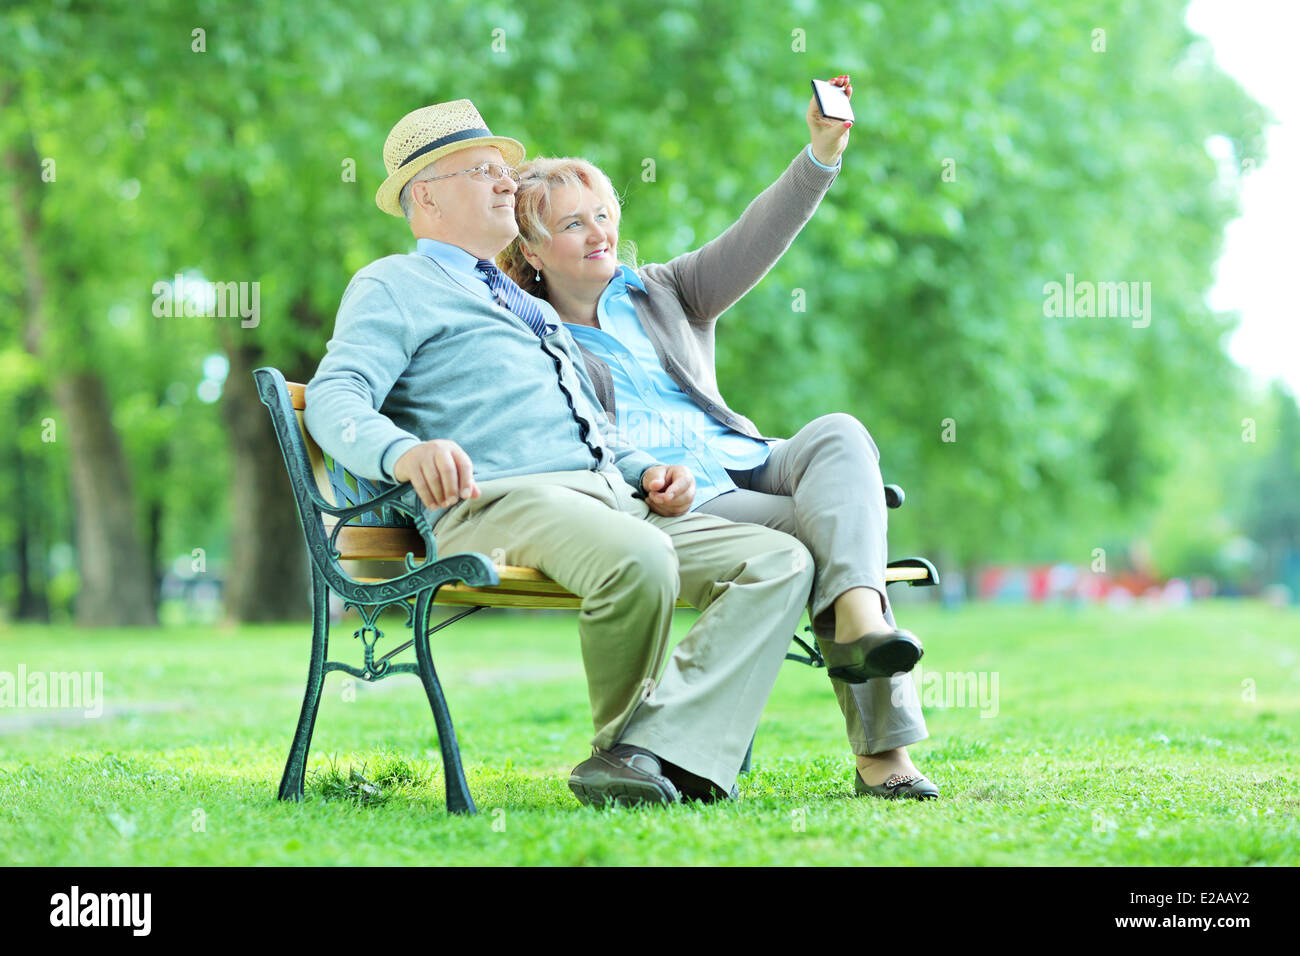 Mature husband and wife taking selfies in the park seated on a wooden bench Stock Photo